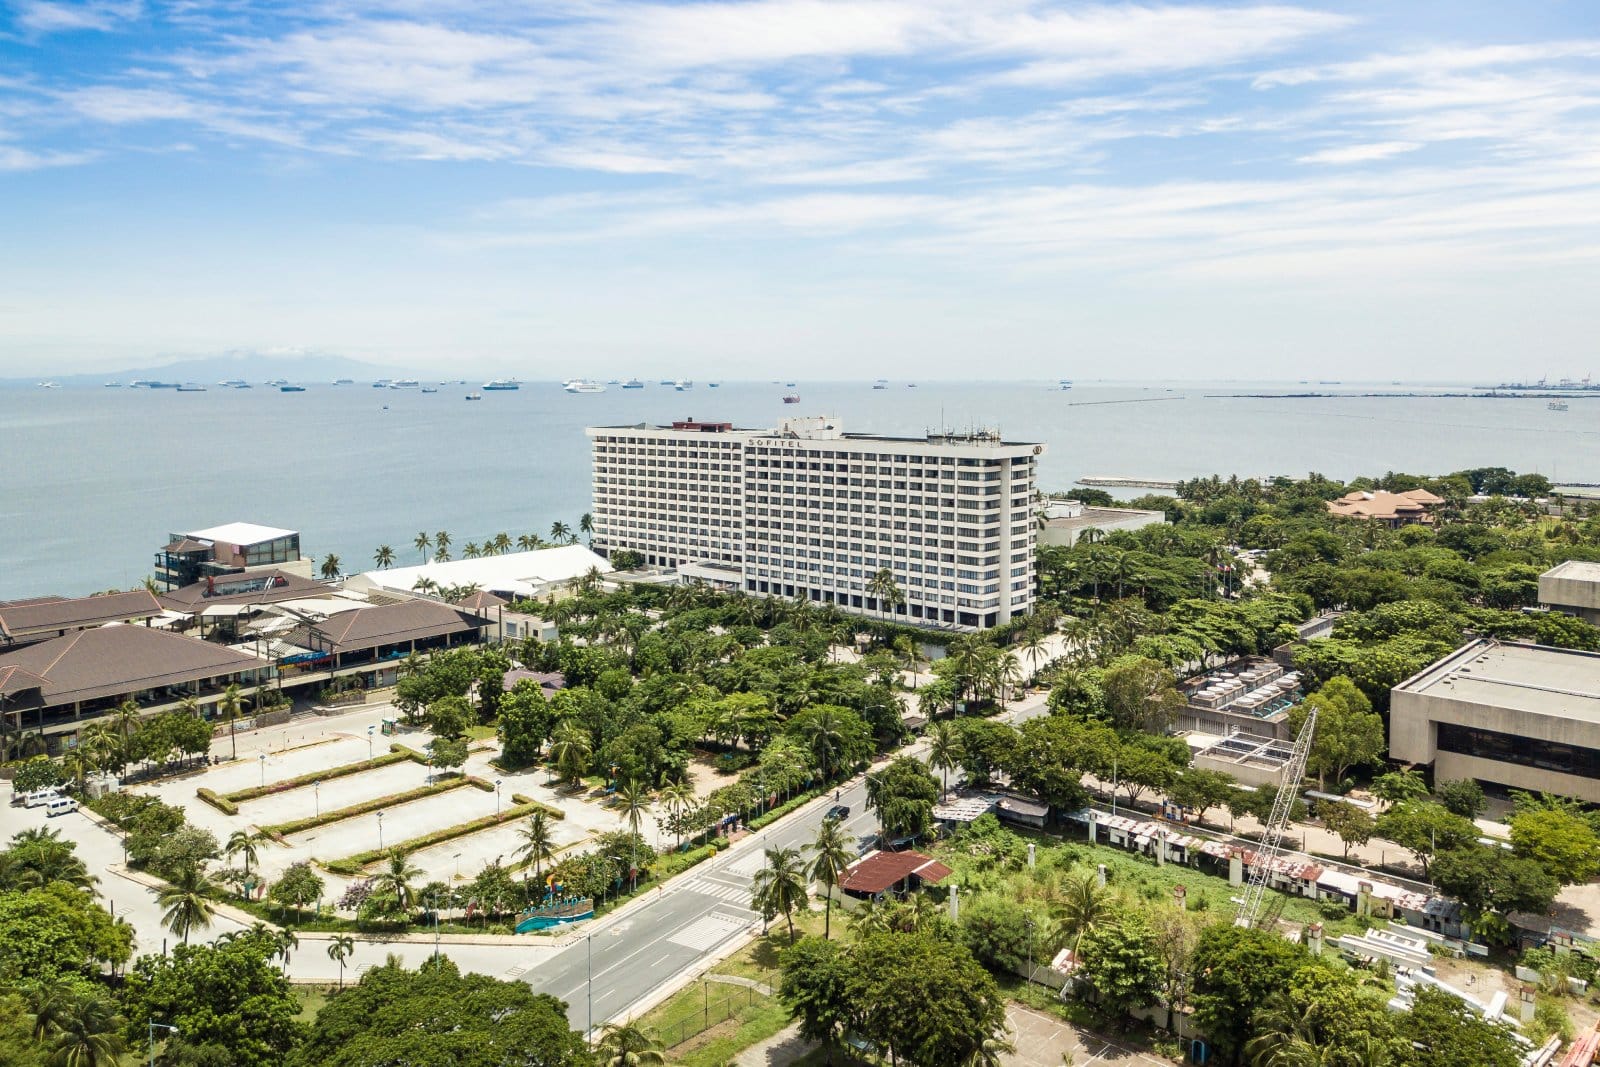 <p class="wp-caption-text">Image Credit: Shutterstock / MDV Edwards</p>  <p><span>Sofitel Philippine Plaza Manila is a five-star luxury hotel in Pasay City, Manila’s cultural and entertainment complex. The hotel is situated near Manila Bay and offers panoramic views of the bay and its famous sunsets, providing a tranquil escape within the bustling metropolis. Designed by National Artists Leandro Locsin and Ildefonso P. Santos, the hotel seamlessly blends French elegance with Filipino craftsmanship, making it a distinguished landmark in the city.</span></p> <p><span>The hotel features 609 rooms and suites, each elegantly furnished and equipped with modern amenities to ensure a comfortable and luxurious stay. The accommodations cater to business and leisure travelers, offering spacious layouts, high-speed internet access, and sophisticated in-room technology.</span></p>